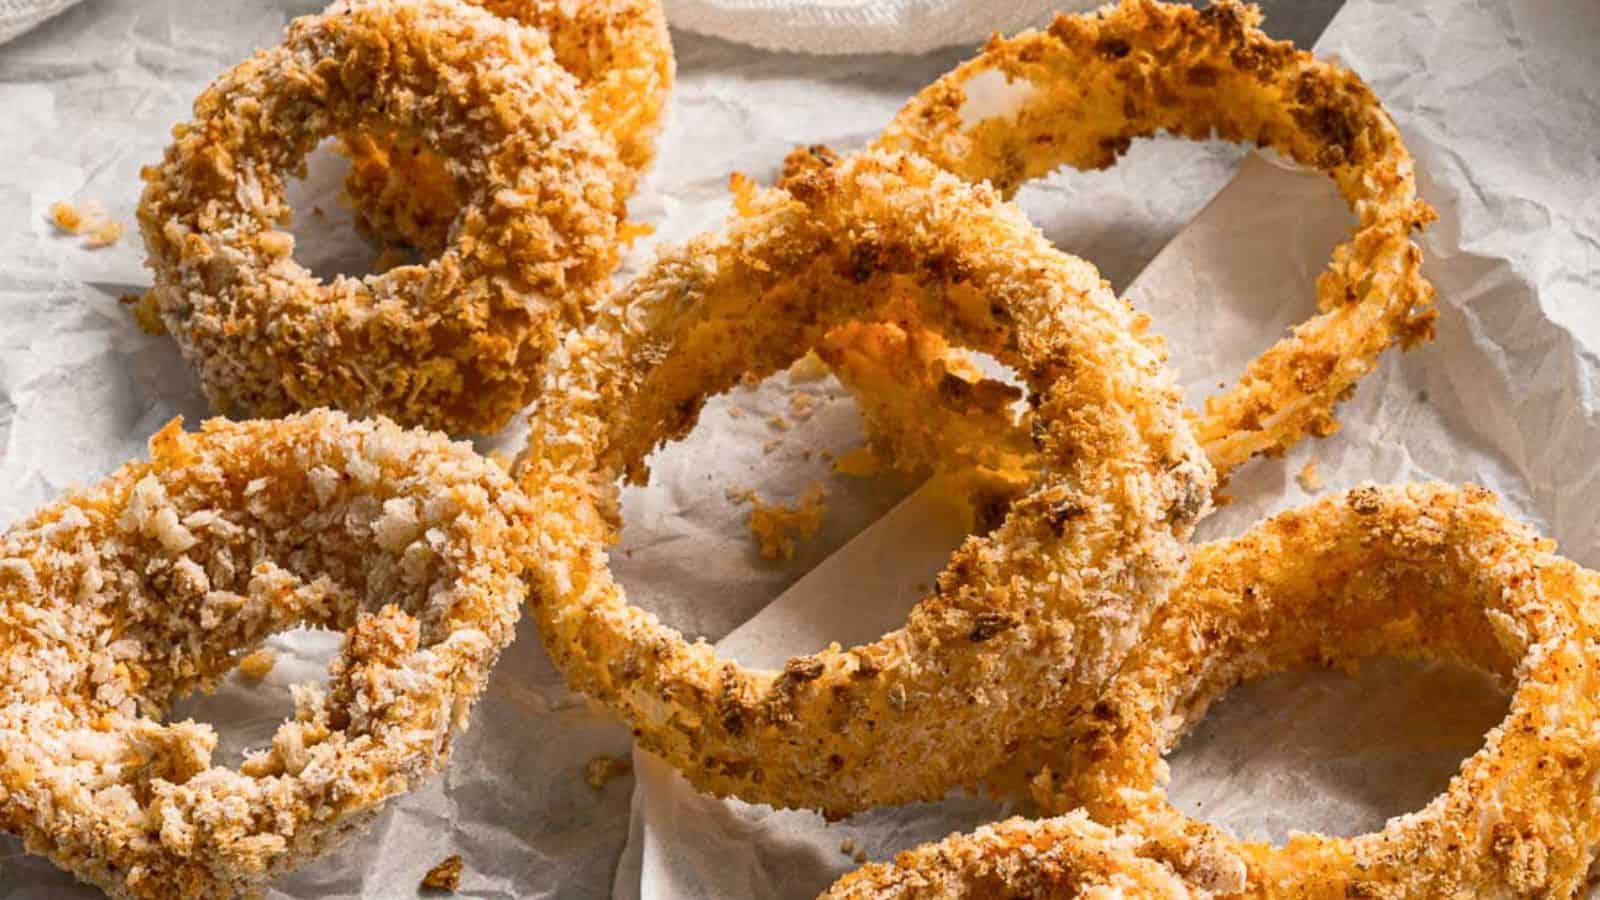 <p>Enjoy the crunch without the grease with these air fryer onion rings. They’re a healthier, guilt-free snack perfect for munching on while watching the game. Crispy on the outside and tender on the inside, these onion rings are a total crowd-pleaser. They will surely be a hit from the first kickoff to the final whistle.<br><strong>Get the Recipe: </strong><a href="https://twocityvegans.com/vegan-air-fryer-onion-rings-recipe/?utm_source=msn&utm_medium=page&utm_campaign=msn" rel="noopener">Air Fryer Onion Rings</a></p>